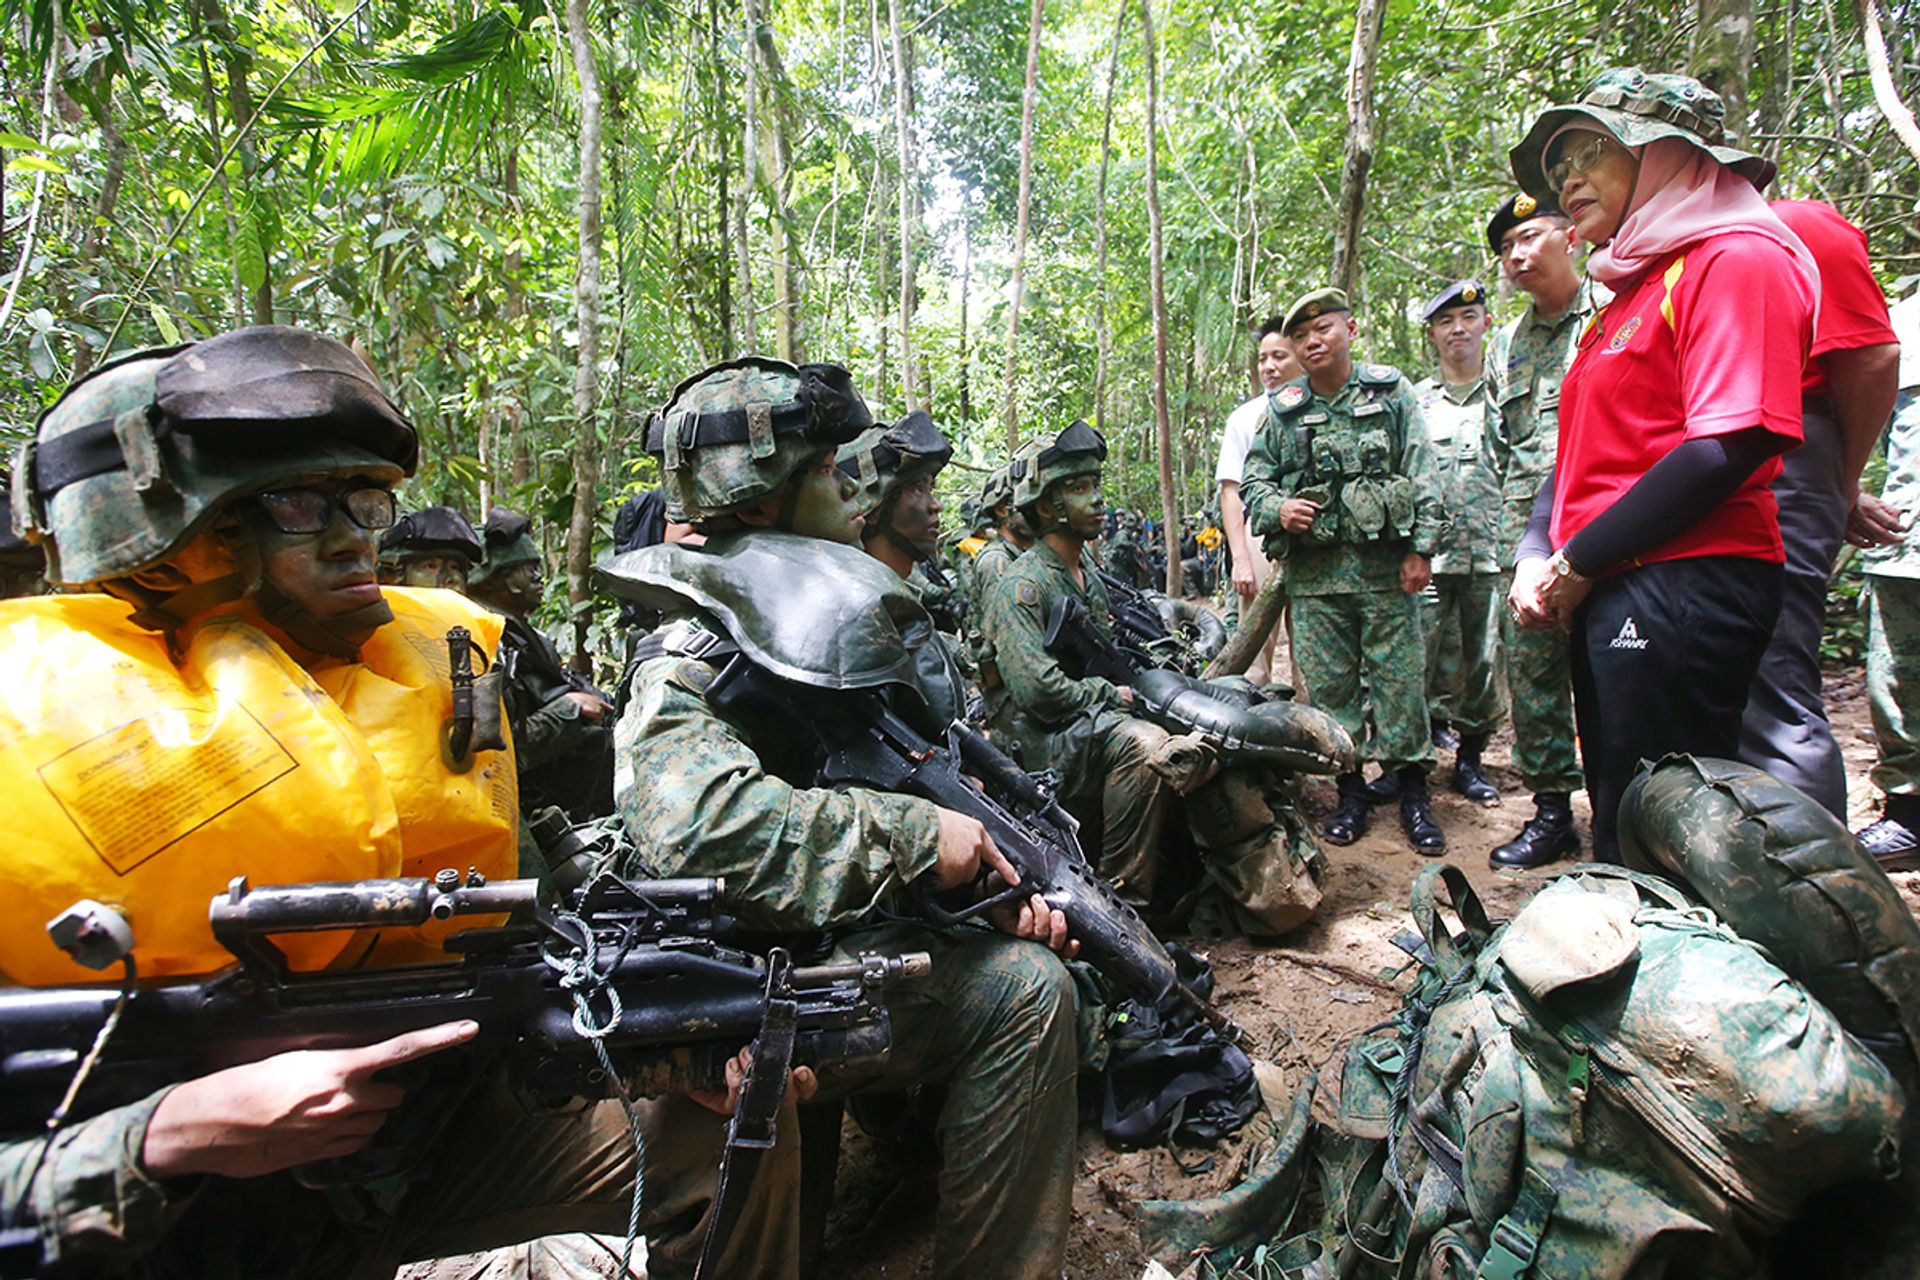 President Halimah, accompanied by then Chief of Army Goh Si Hou (on her right), speaking to Singapore Armed Forces officer cadets during their training in Temburong in Brunei on May 13, 2018. Madam Halimah was in Brunei on her first state visit since she became president. ST PHOTO: GAVIN FOO